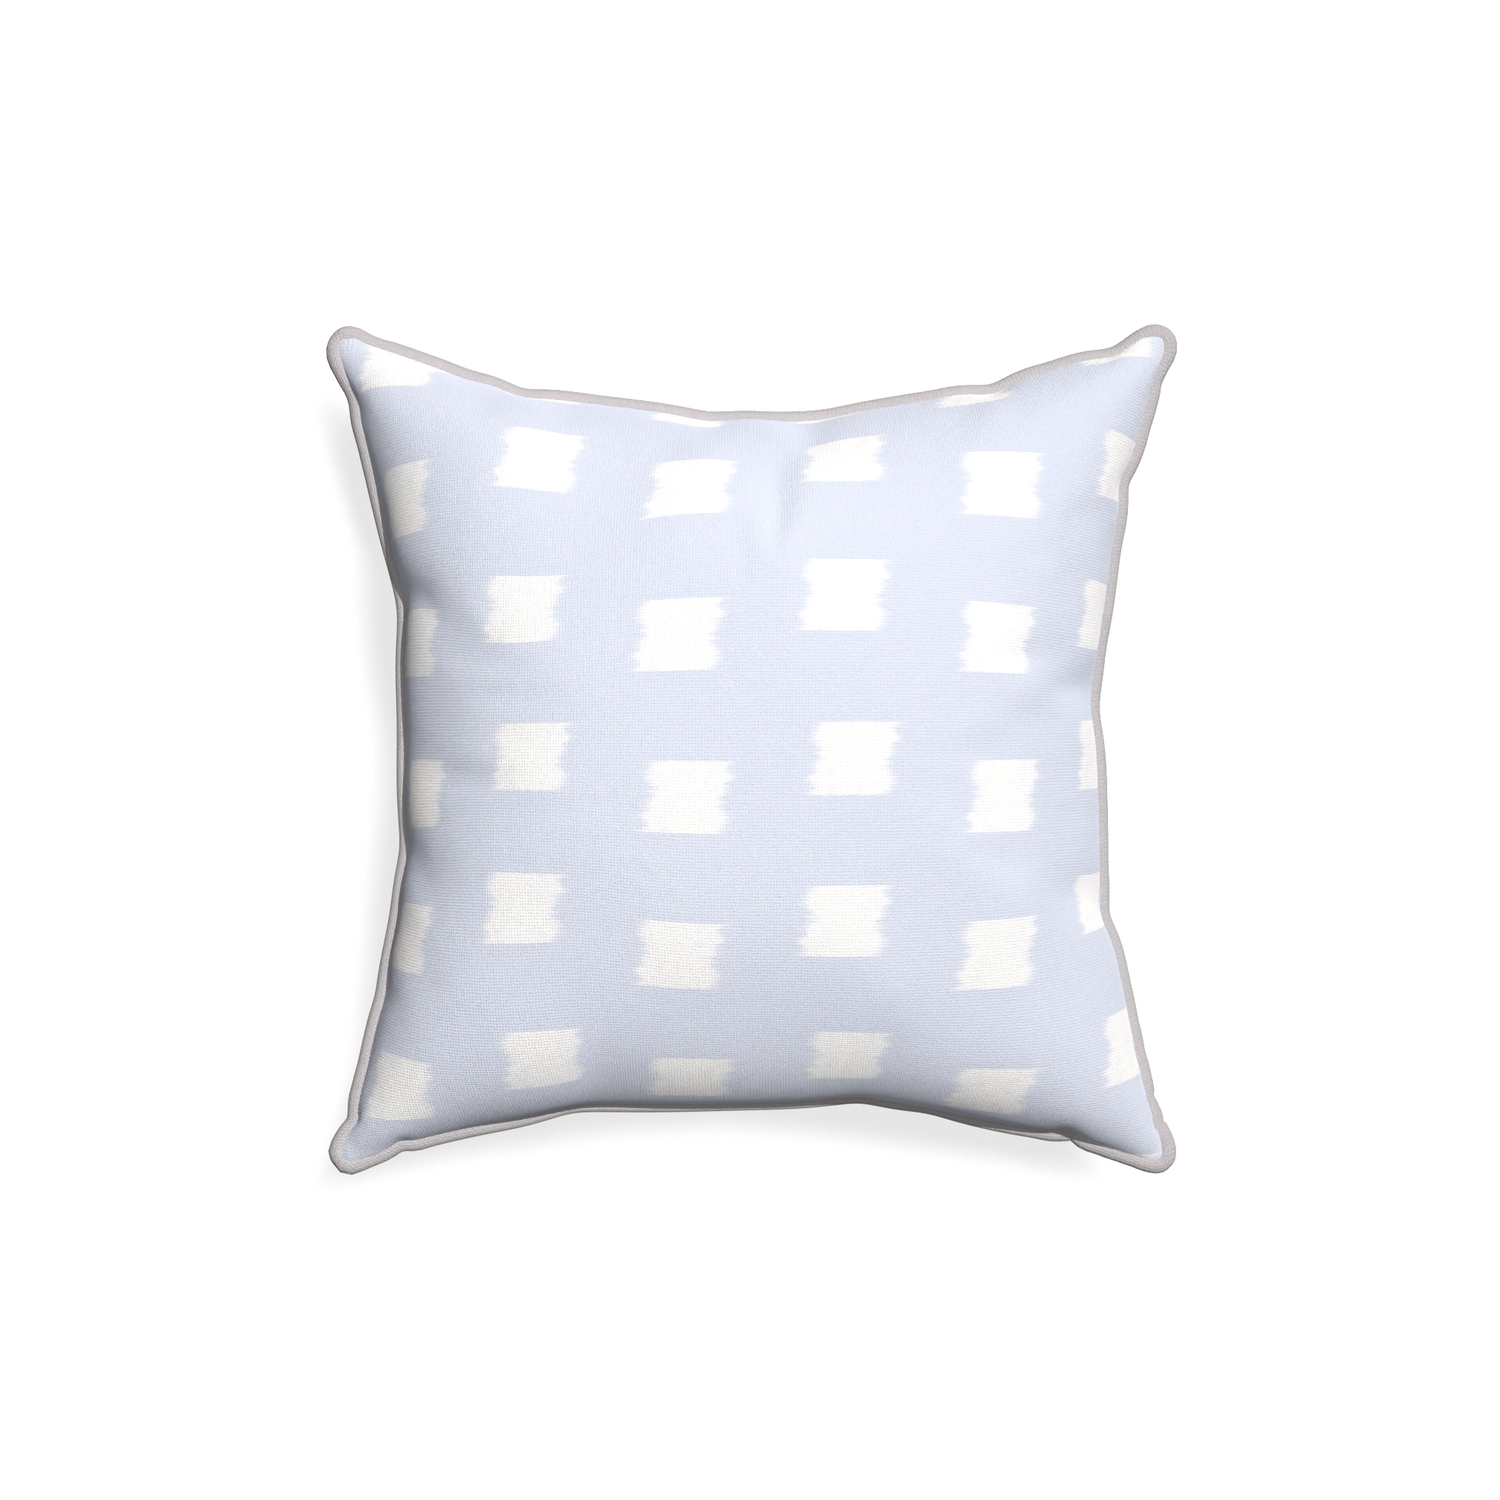 18-square denton custom pillow with pebble piping on white background